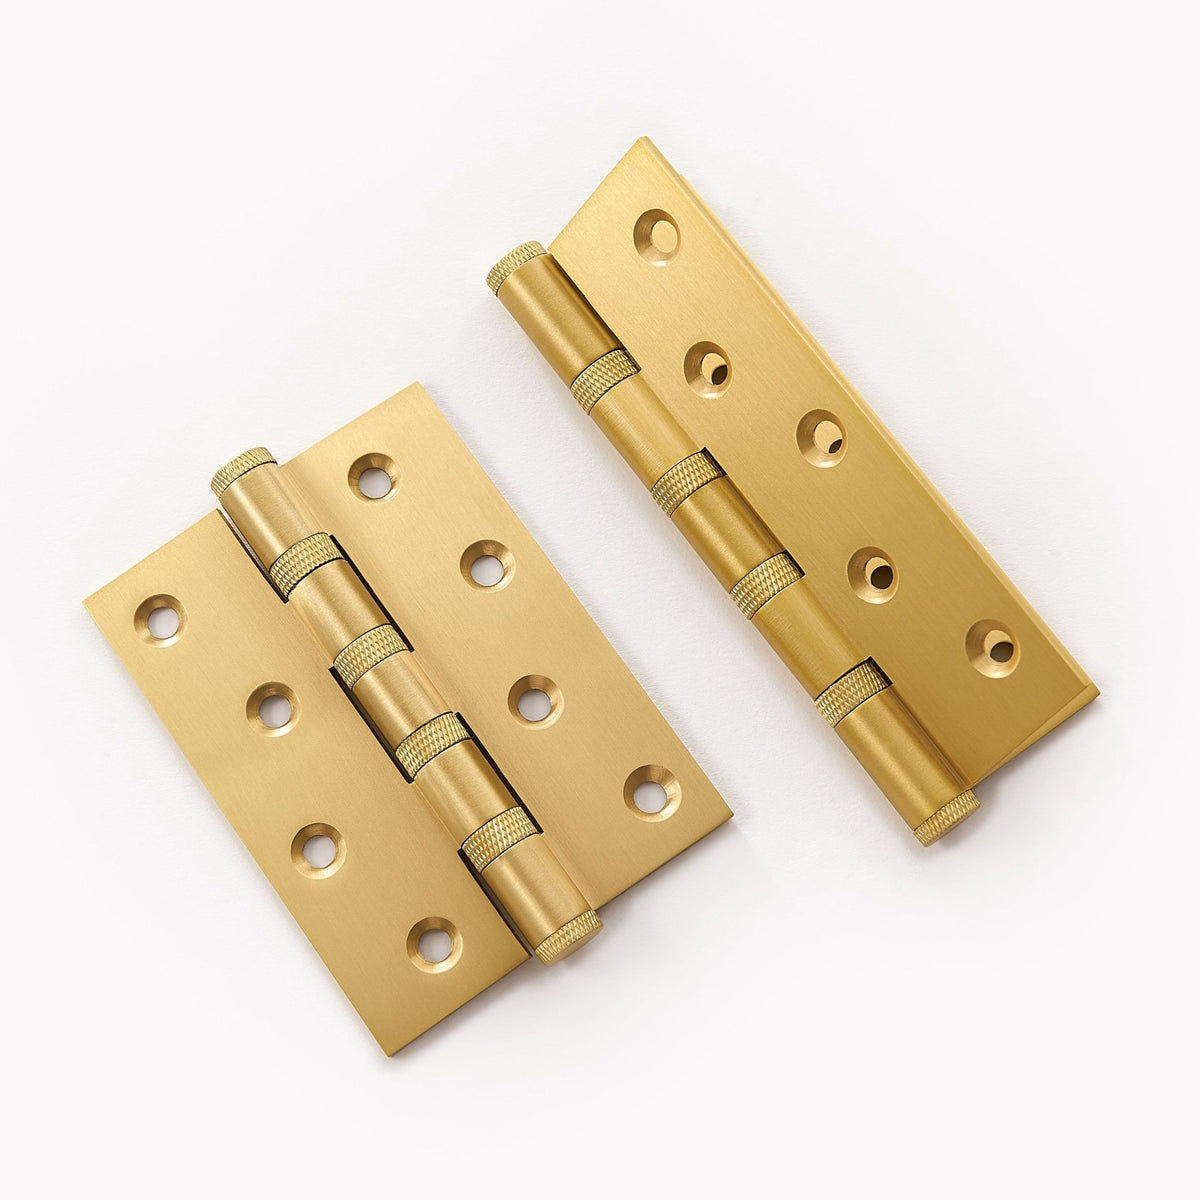 Cross-Knurled Solid Brass Butt Hinge | Gold S - M